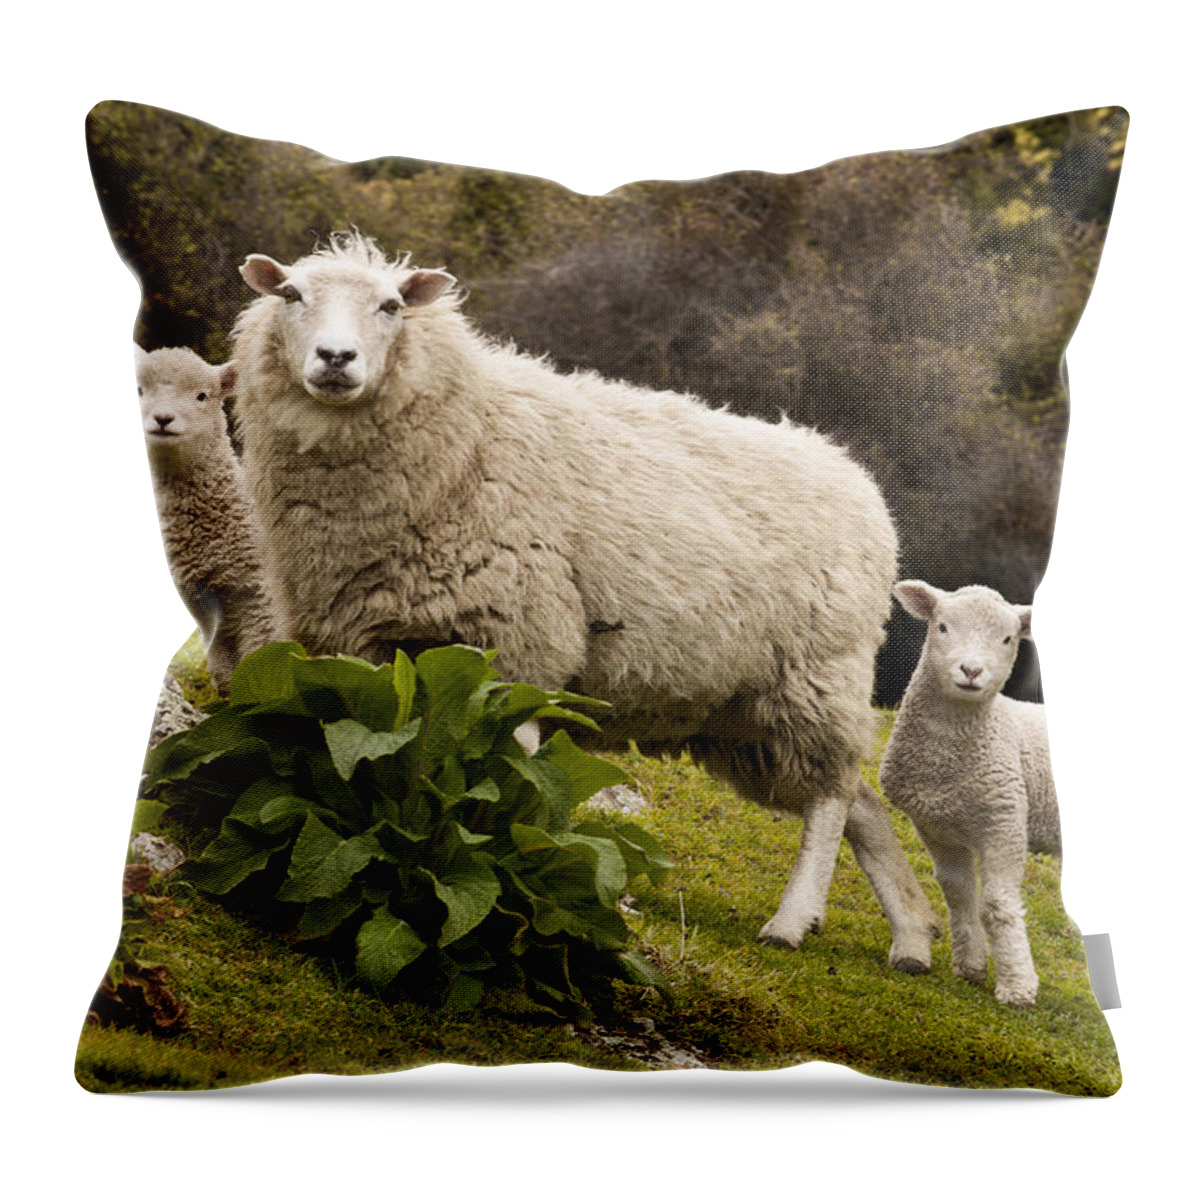 00479625 Throw Pillow featuring the photograph Sheep With Twin Lambs Stony Bay by Colin Monteath